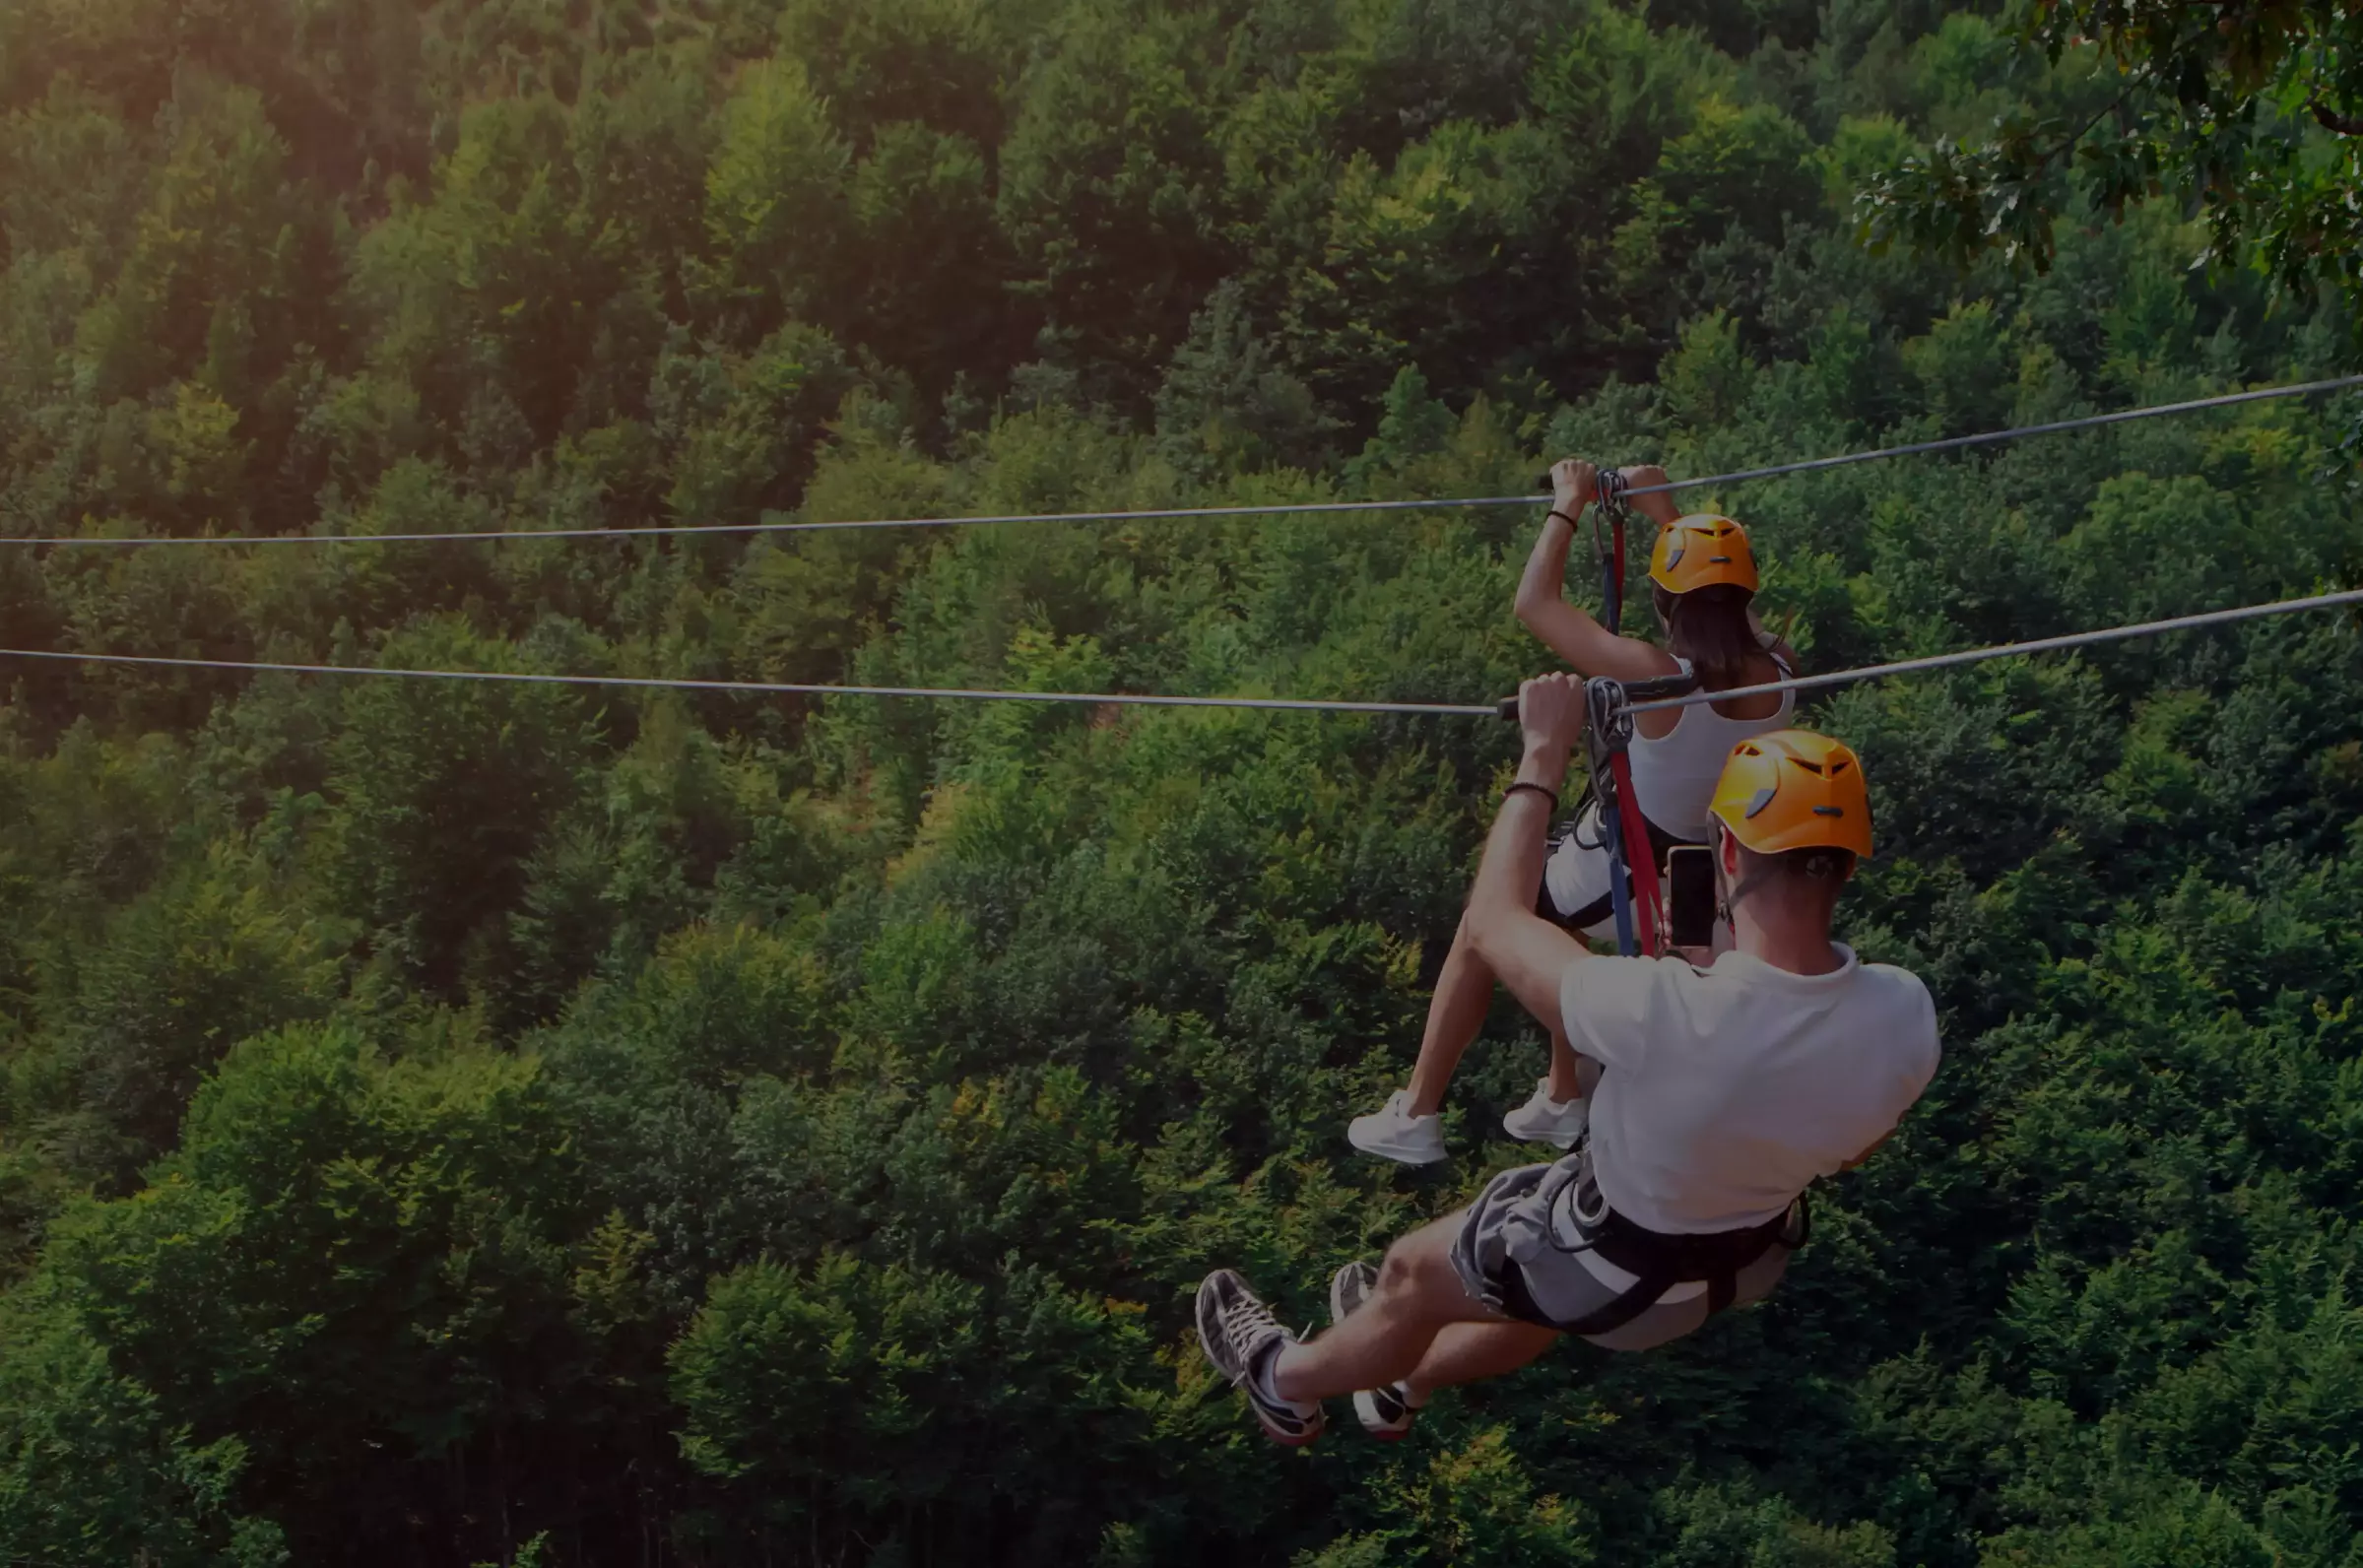 woman zip lining above the trees